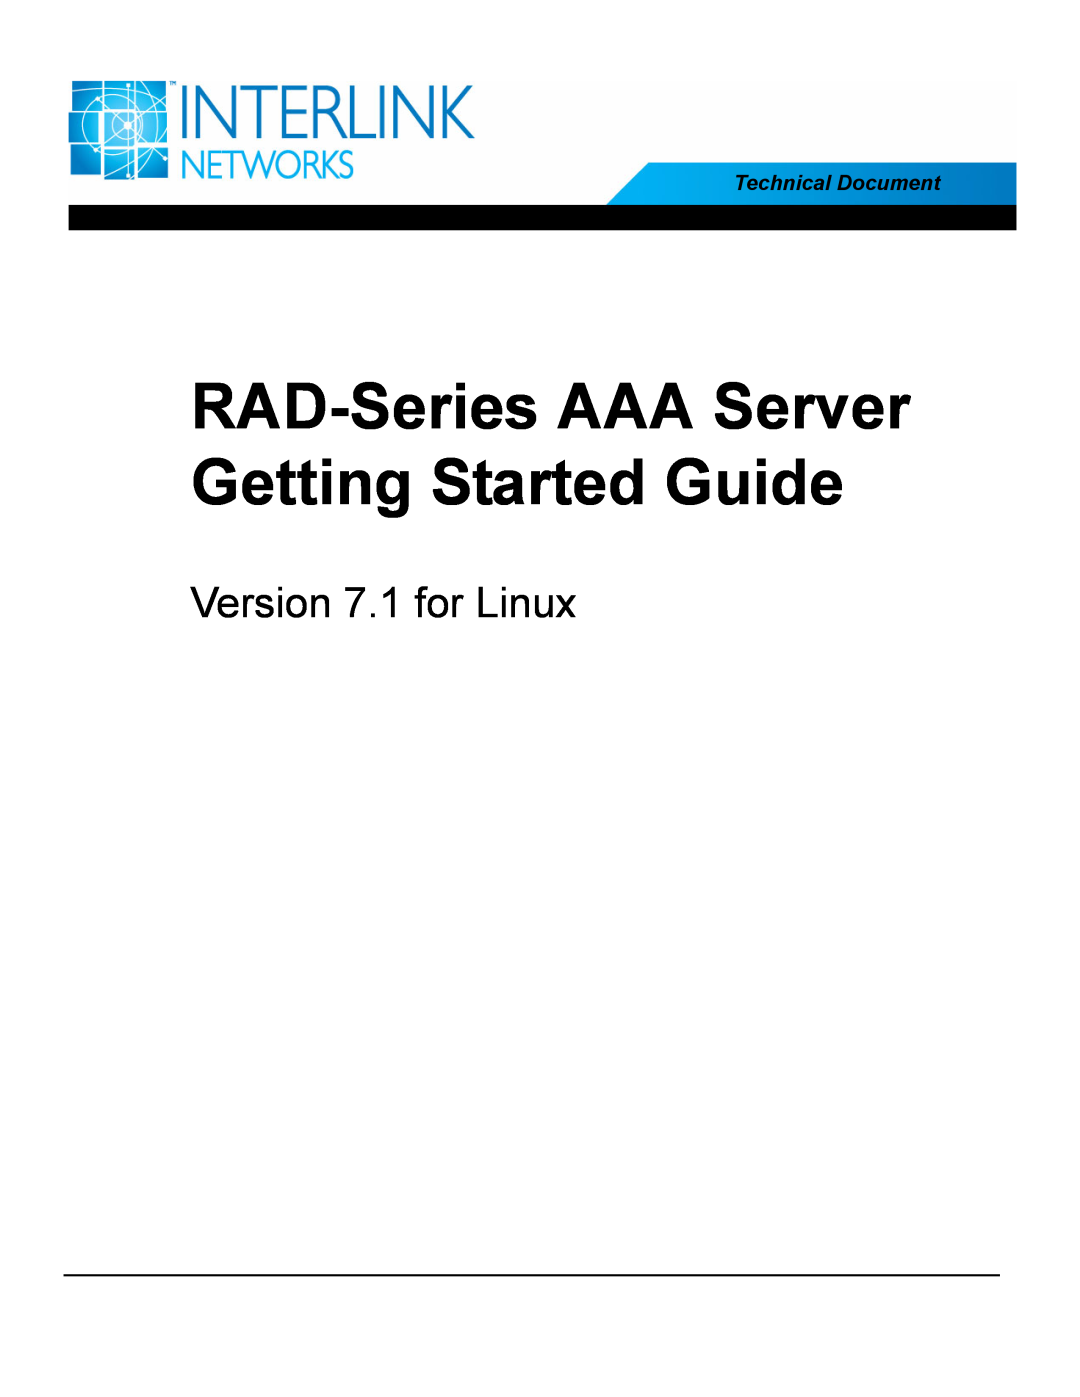 Interlink electronic manual RAD-Series AAA Server Getting Started Guide, Version 7.1 for Linux, Technical Document 